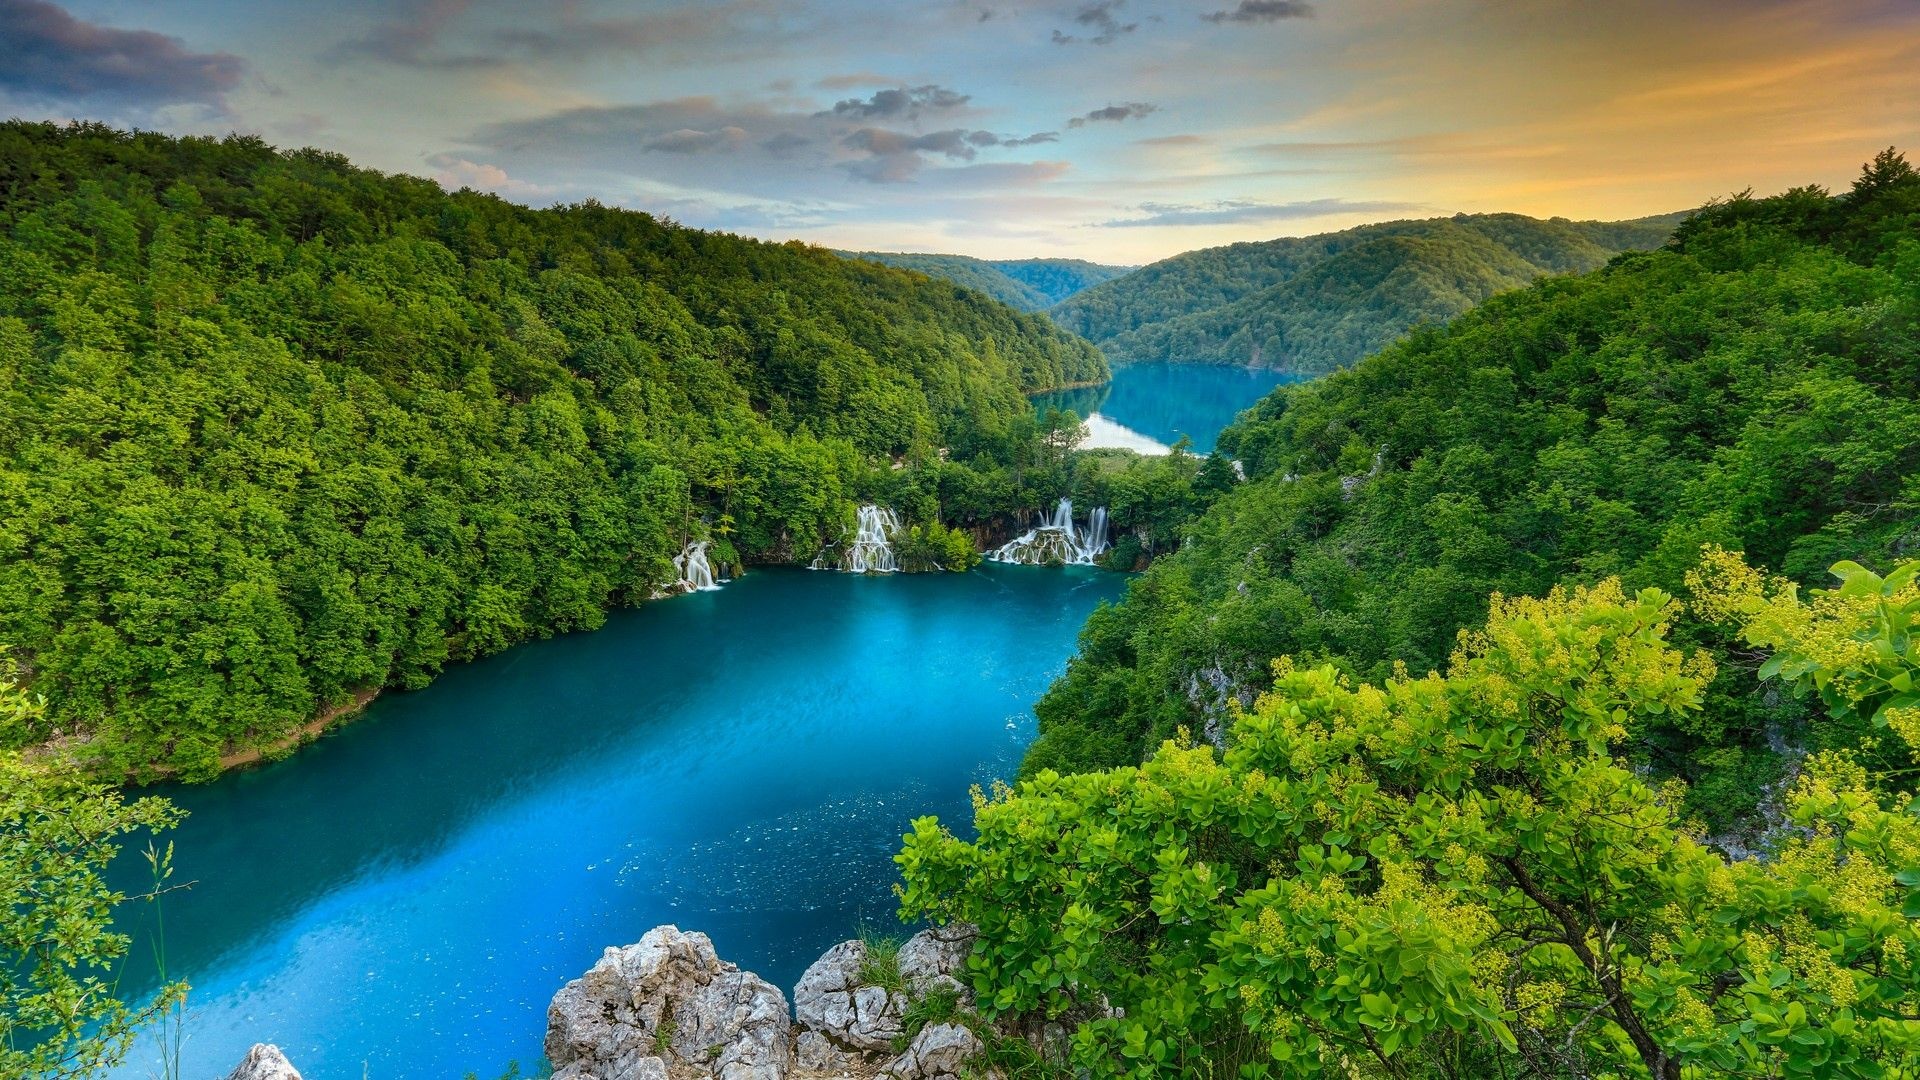 Croatia: Plitvice Lakes National Park, Reputed for its 16 emerald lakes. 1920x1080 Full HD Wallpaper.